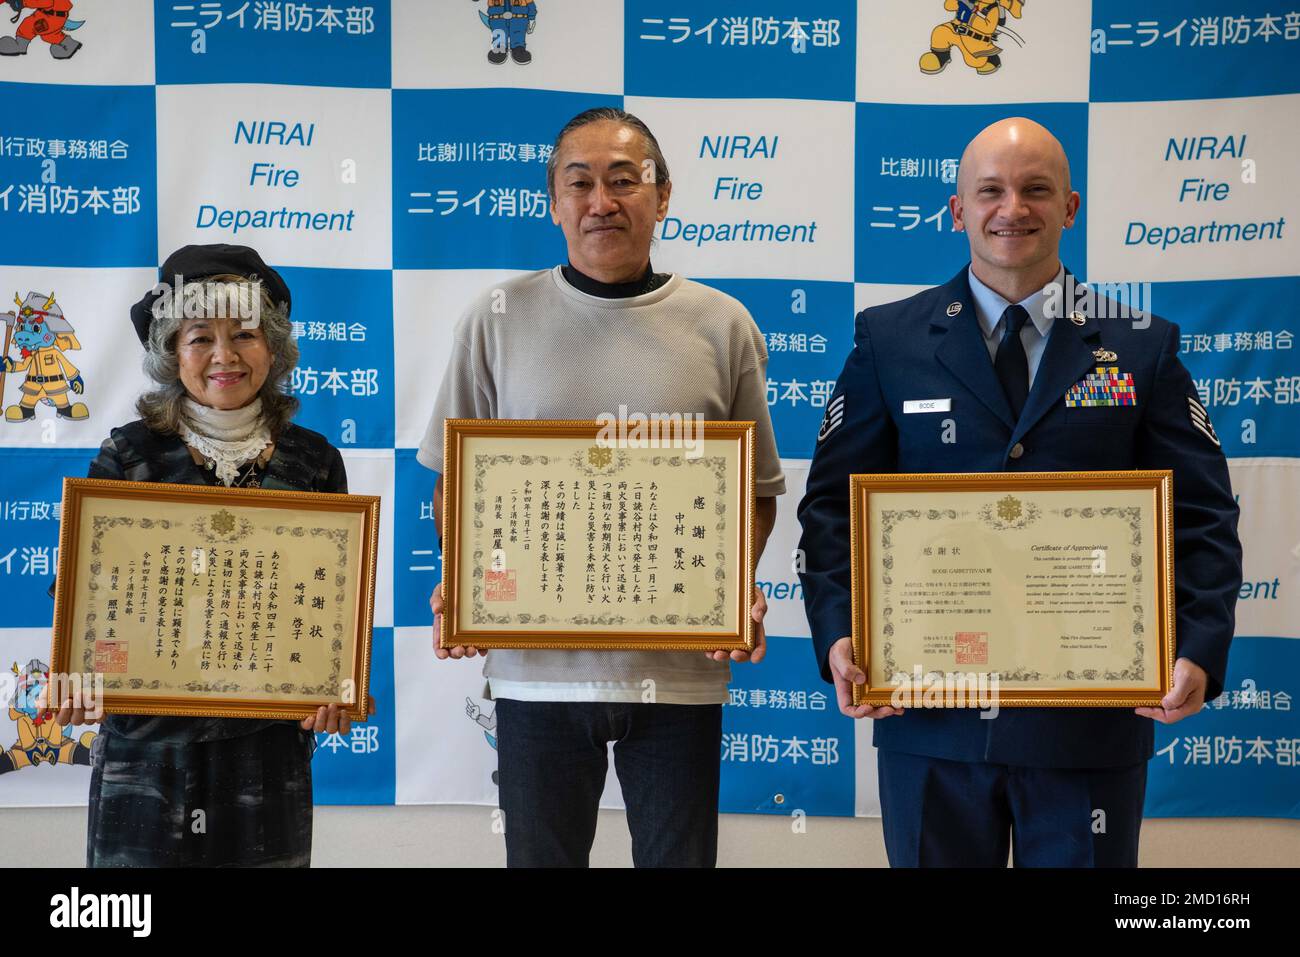 U.S. Air Force Staff Sgt. Garrett Bodie, right, 733rd Air Mobility Squadron support NCO in charge, holds his certificate of appreciation while standing alongside two Japanese locals at a ceremony meant to honor the three of them, at the Nirai Fire Department in Okinawa, Japan, July 12. All three honorees received recognition for helping save the life of a local man whose truck caught fire on Jan. 22, 2022. Stock Photo